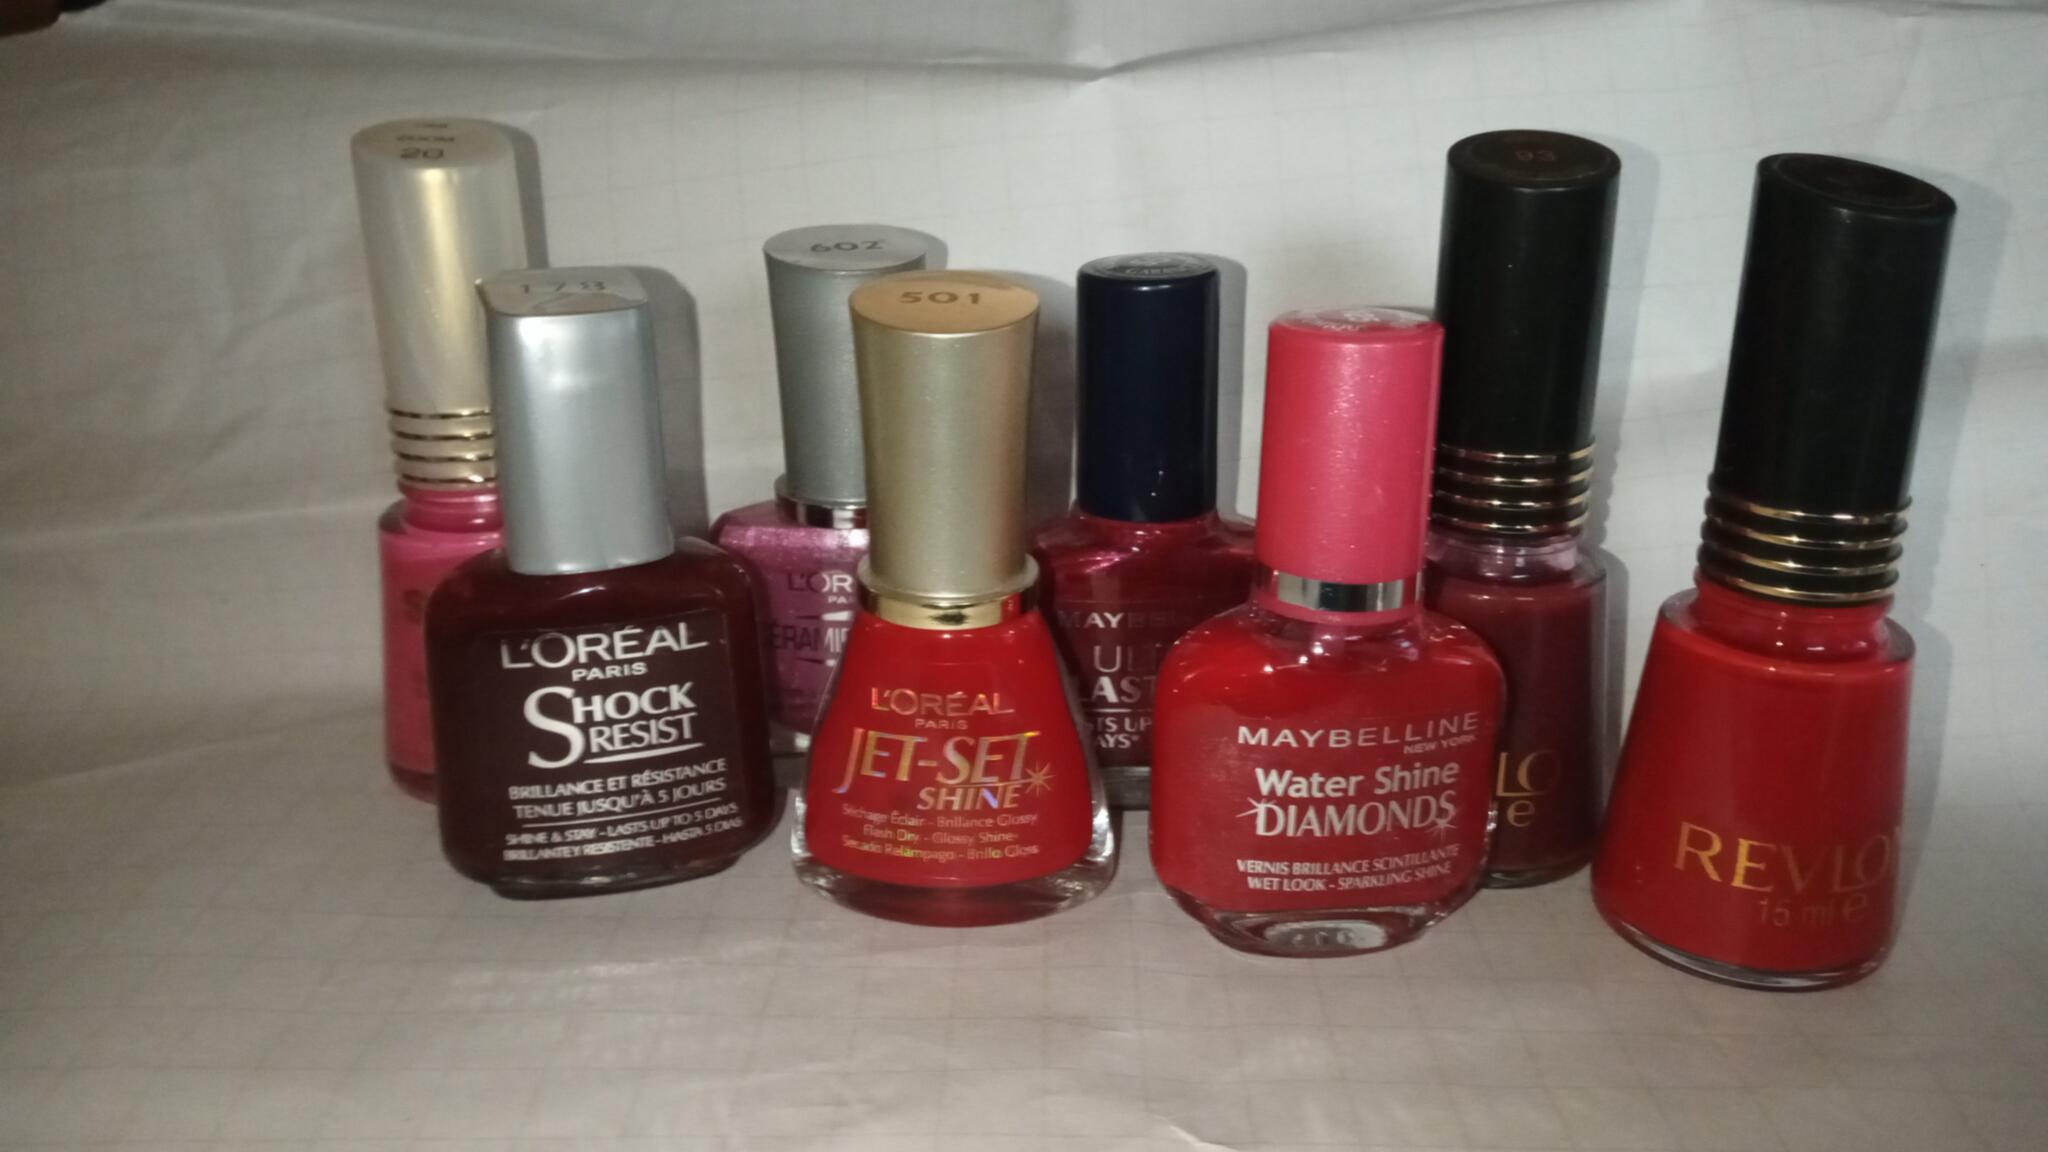 Nail Polishes 4 For £8 For £8 In London, Engl& | For Sale & Free — Nextdoor